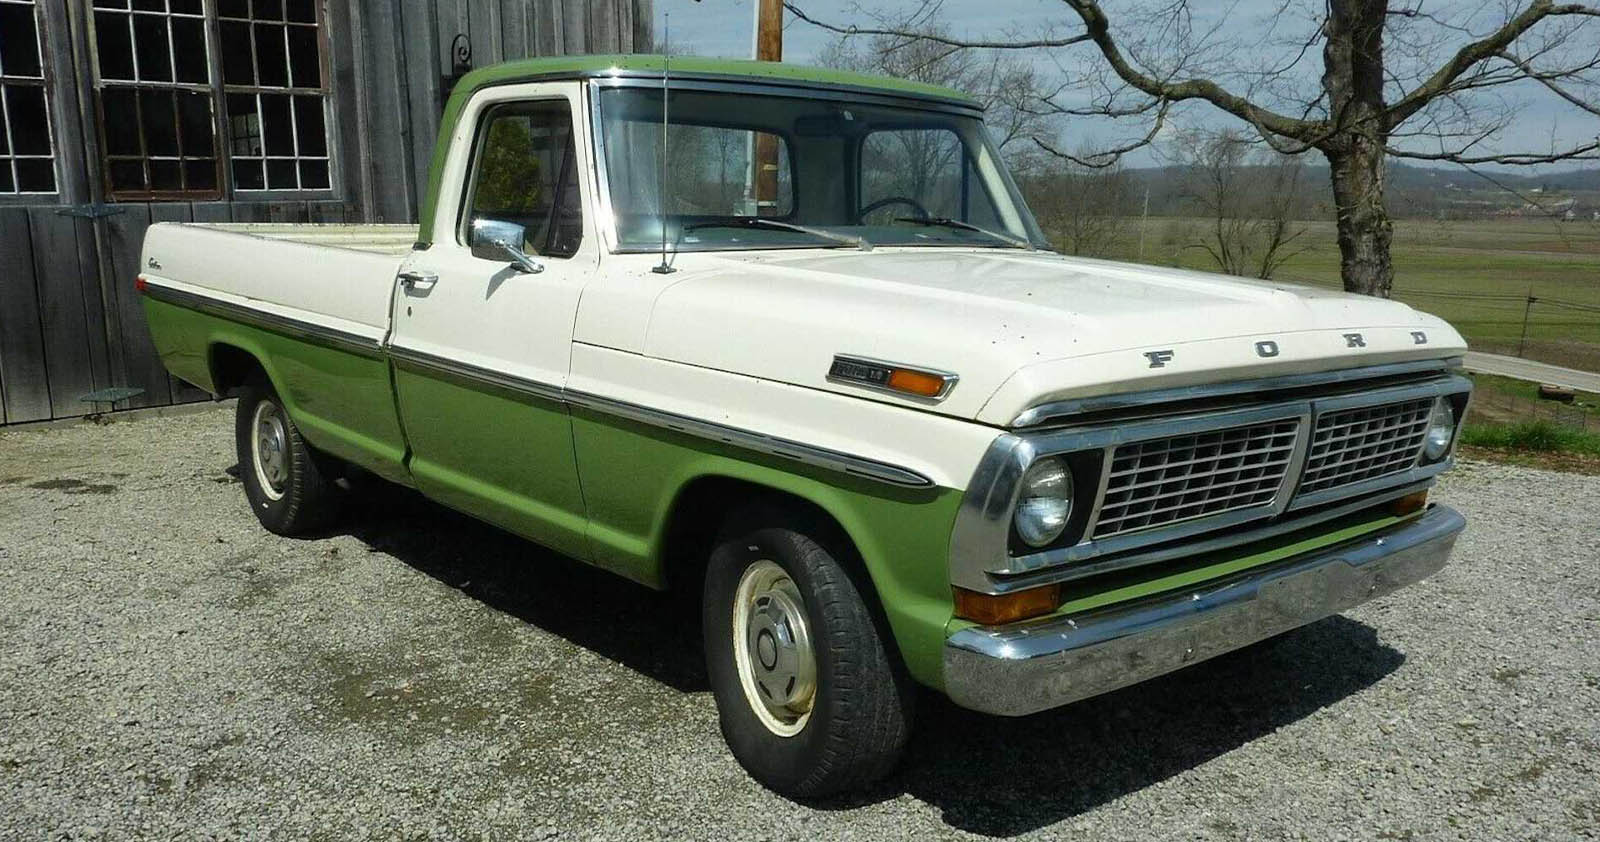 1970 white and green Ford F-100 pickup outside a barn